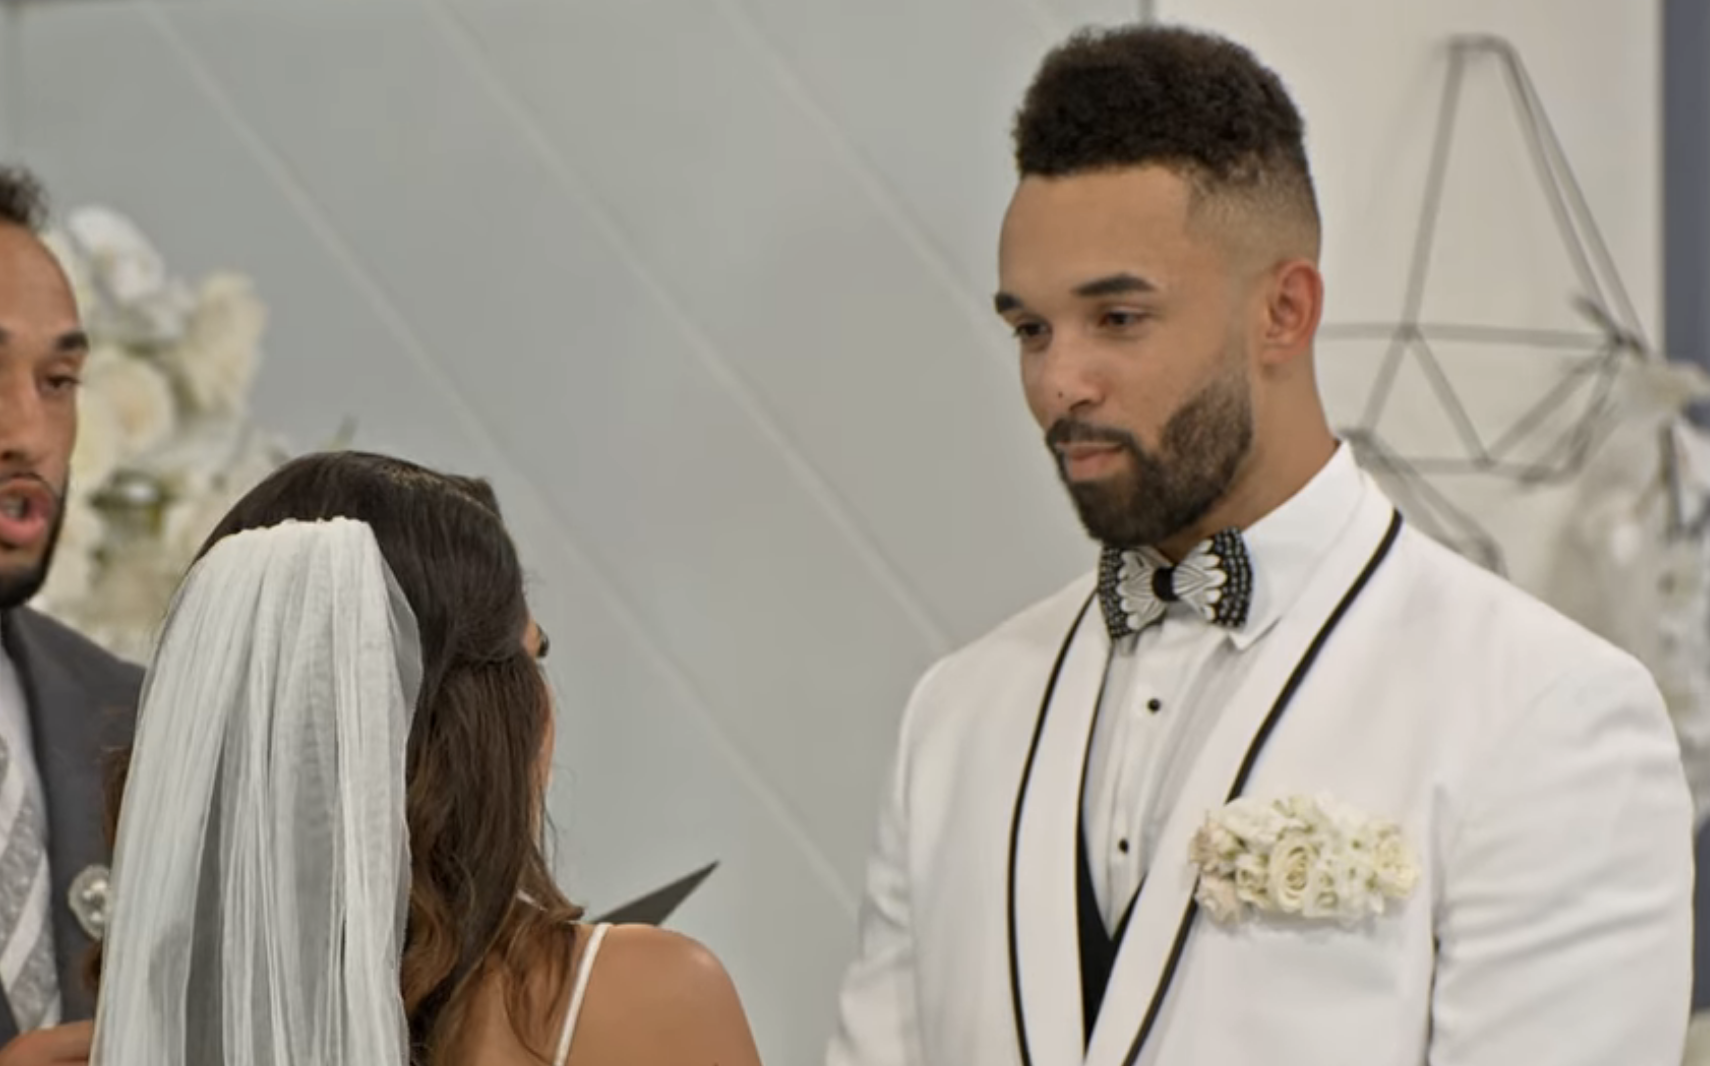 Bartise looking at Nancy during the wedding ceremony